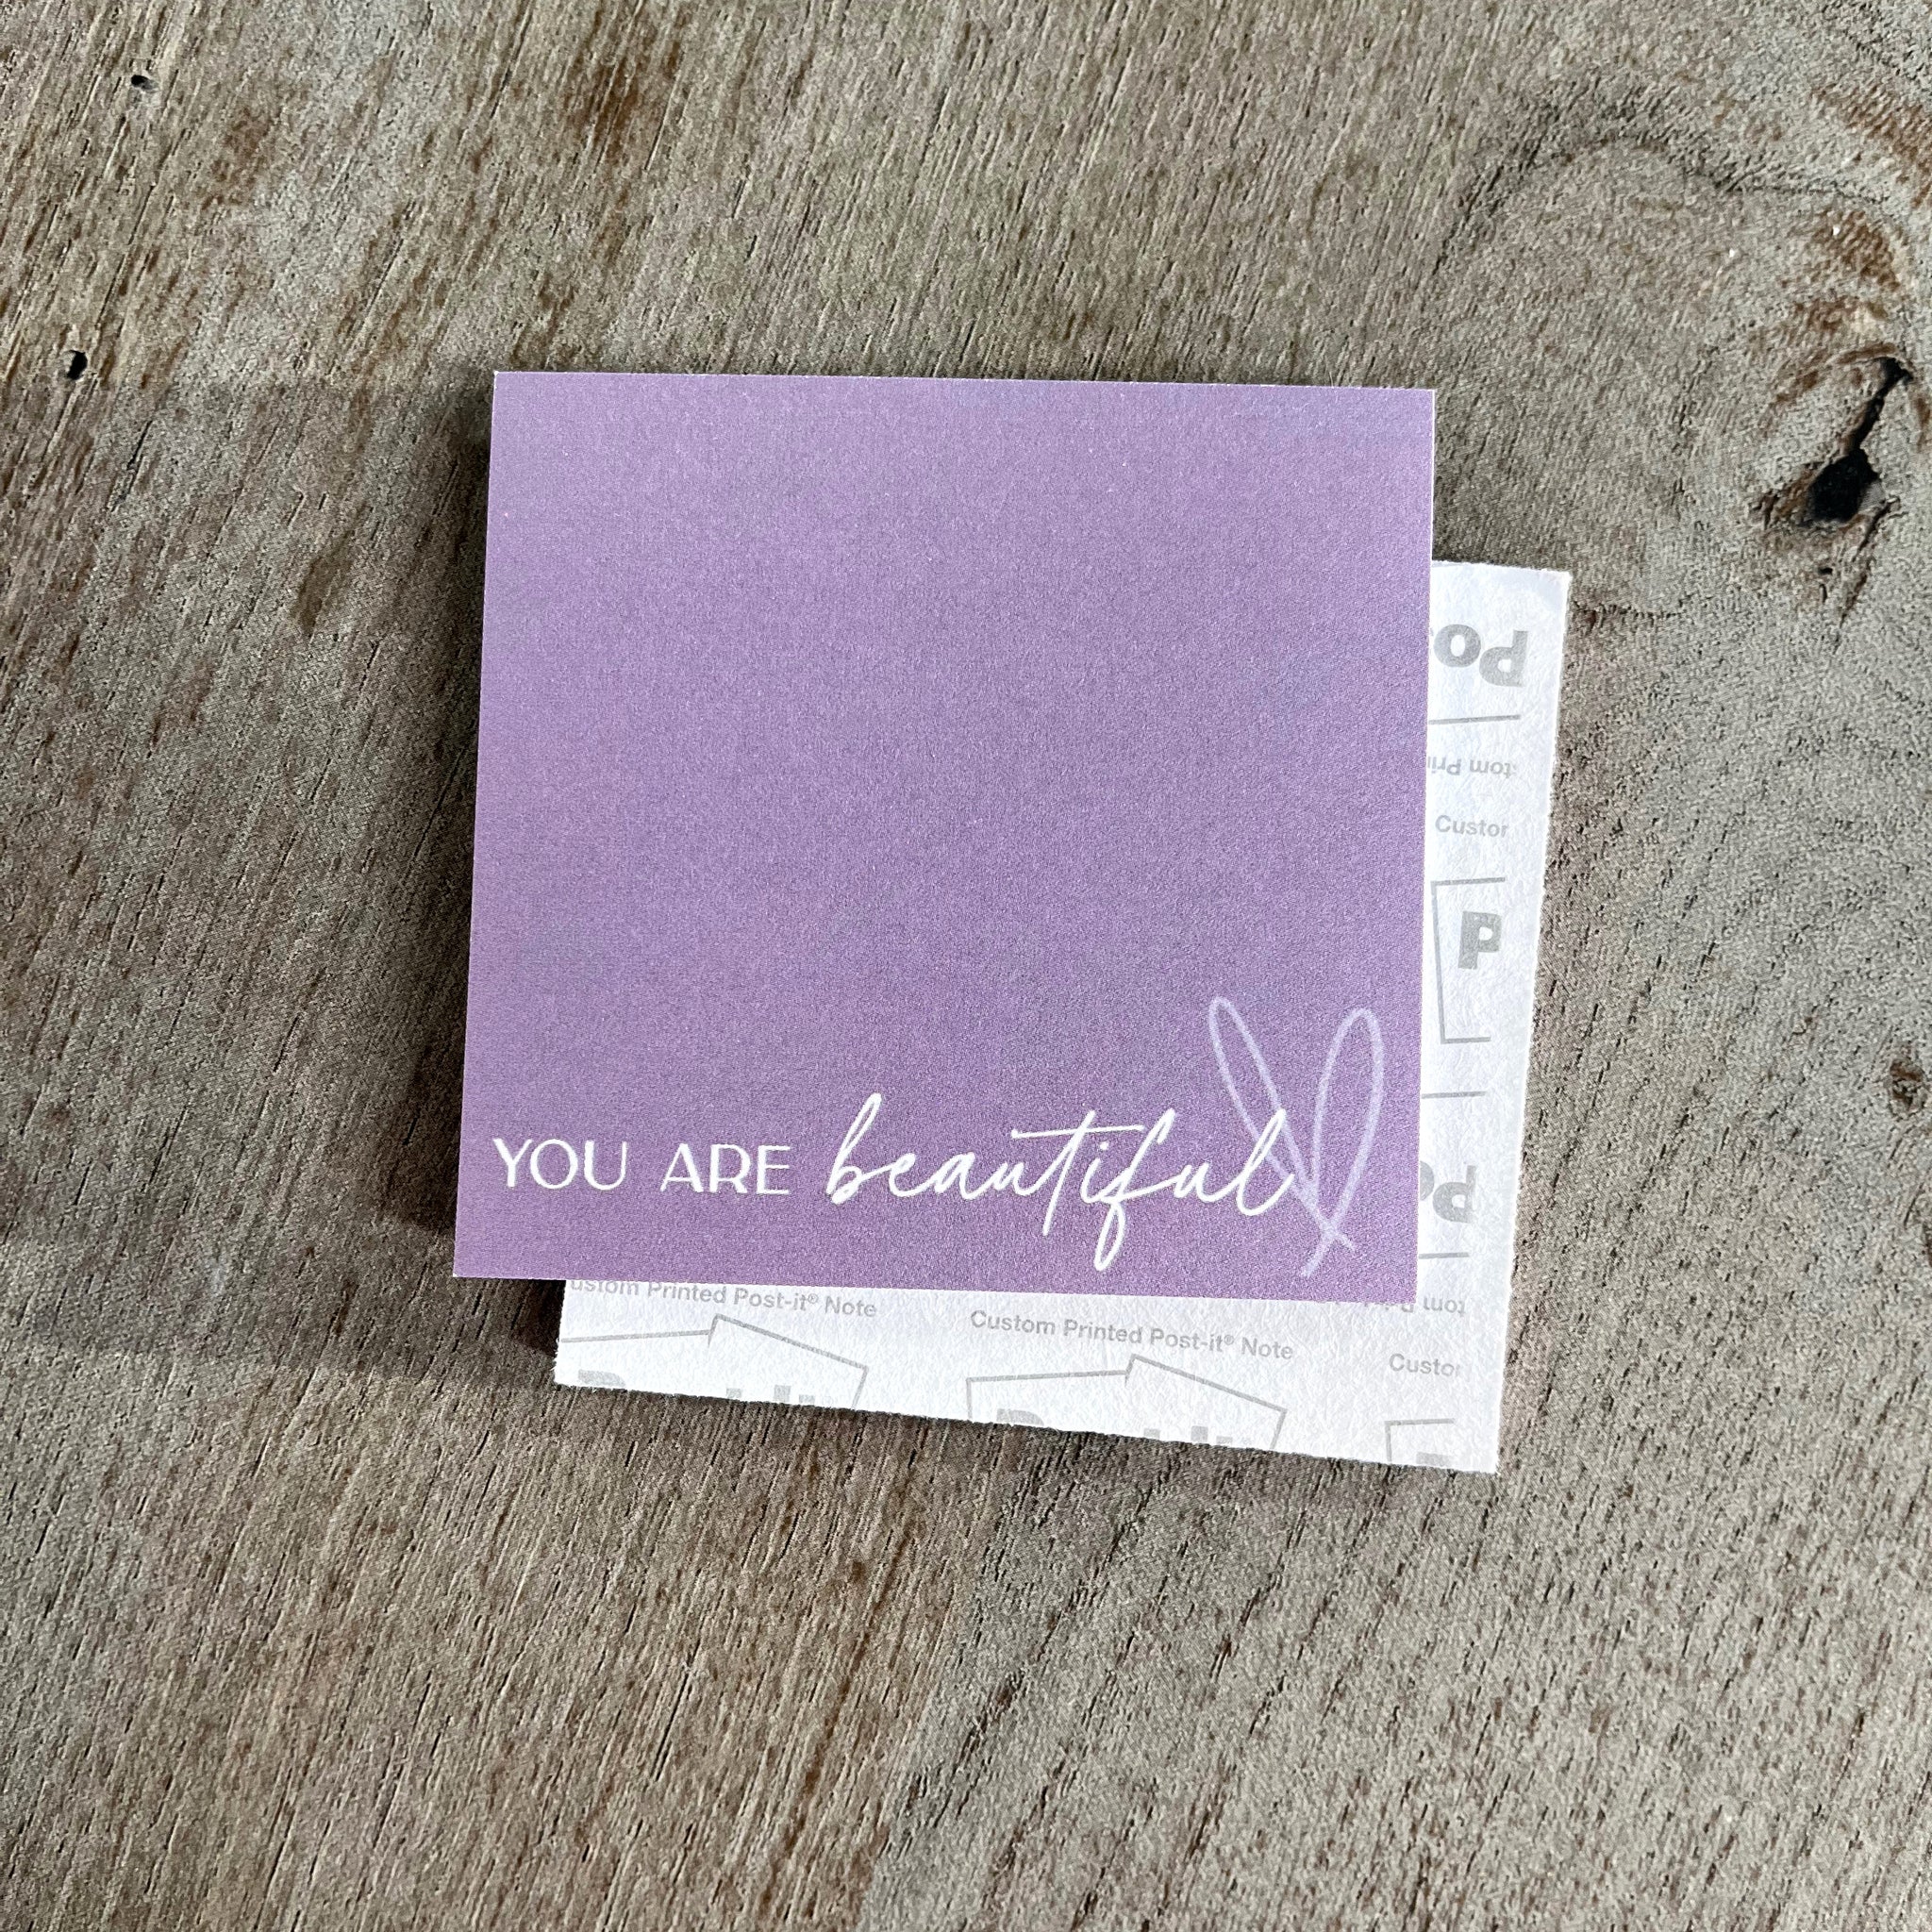 "You Are Beautiful" Post-it Note